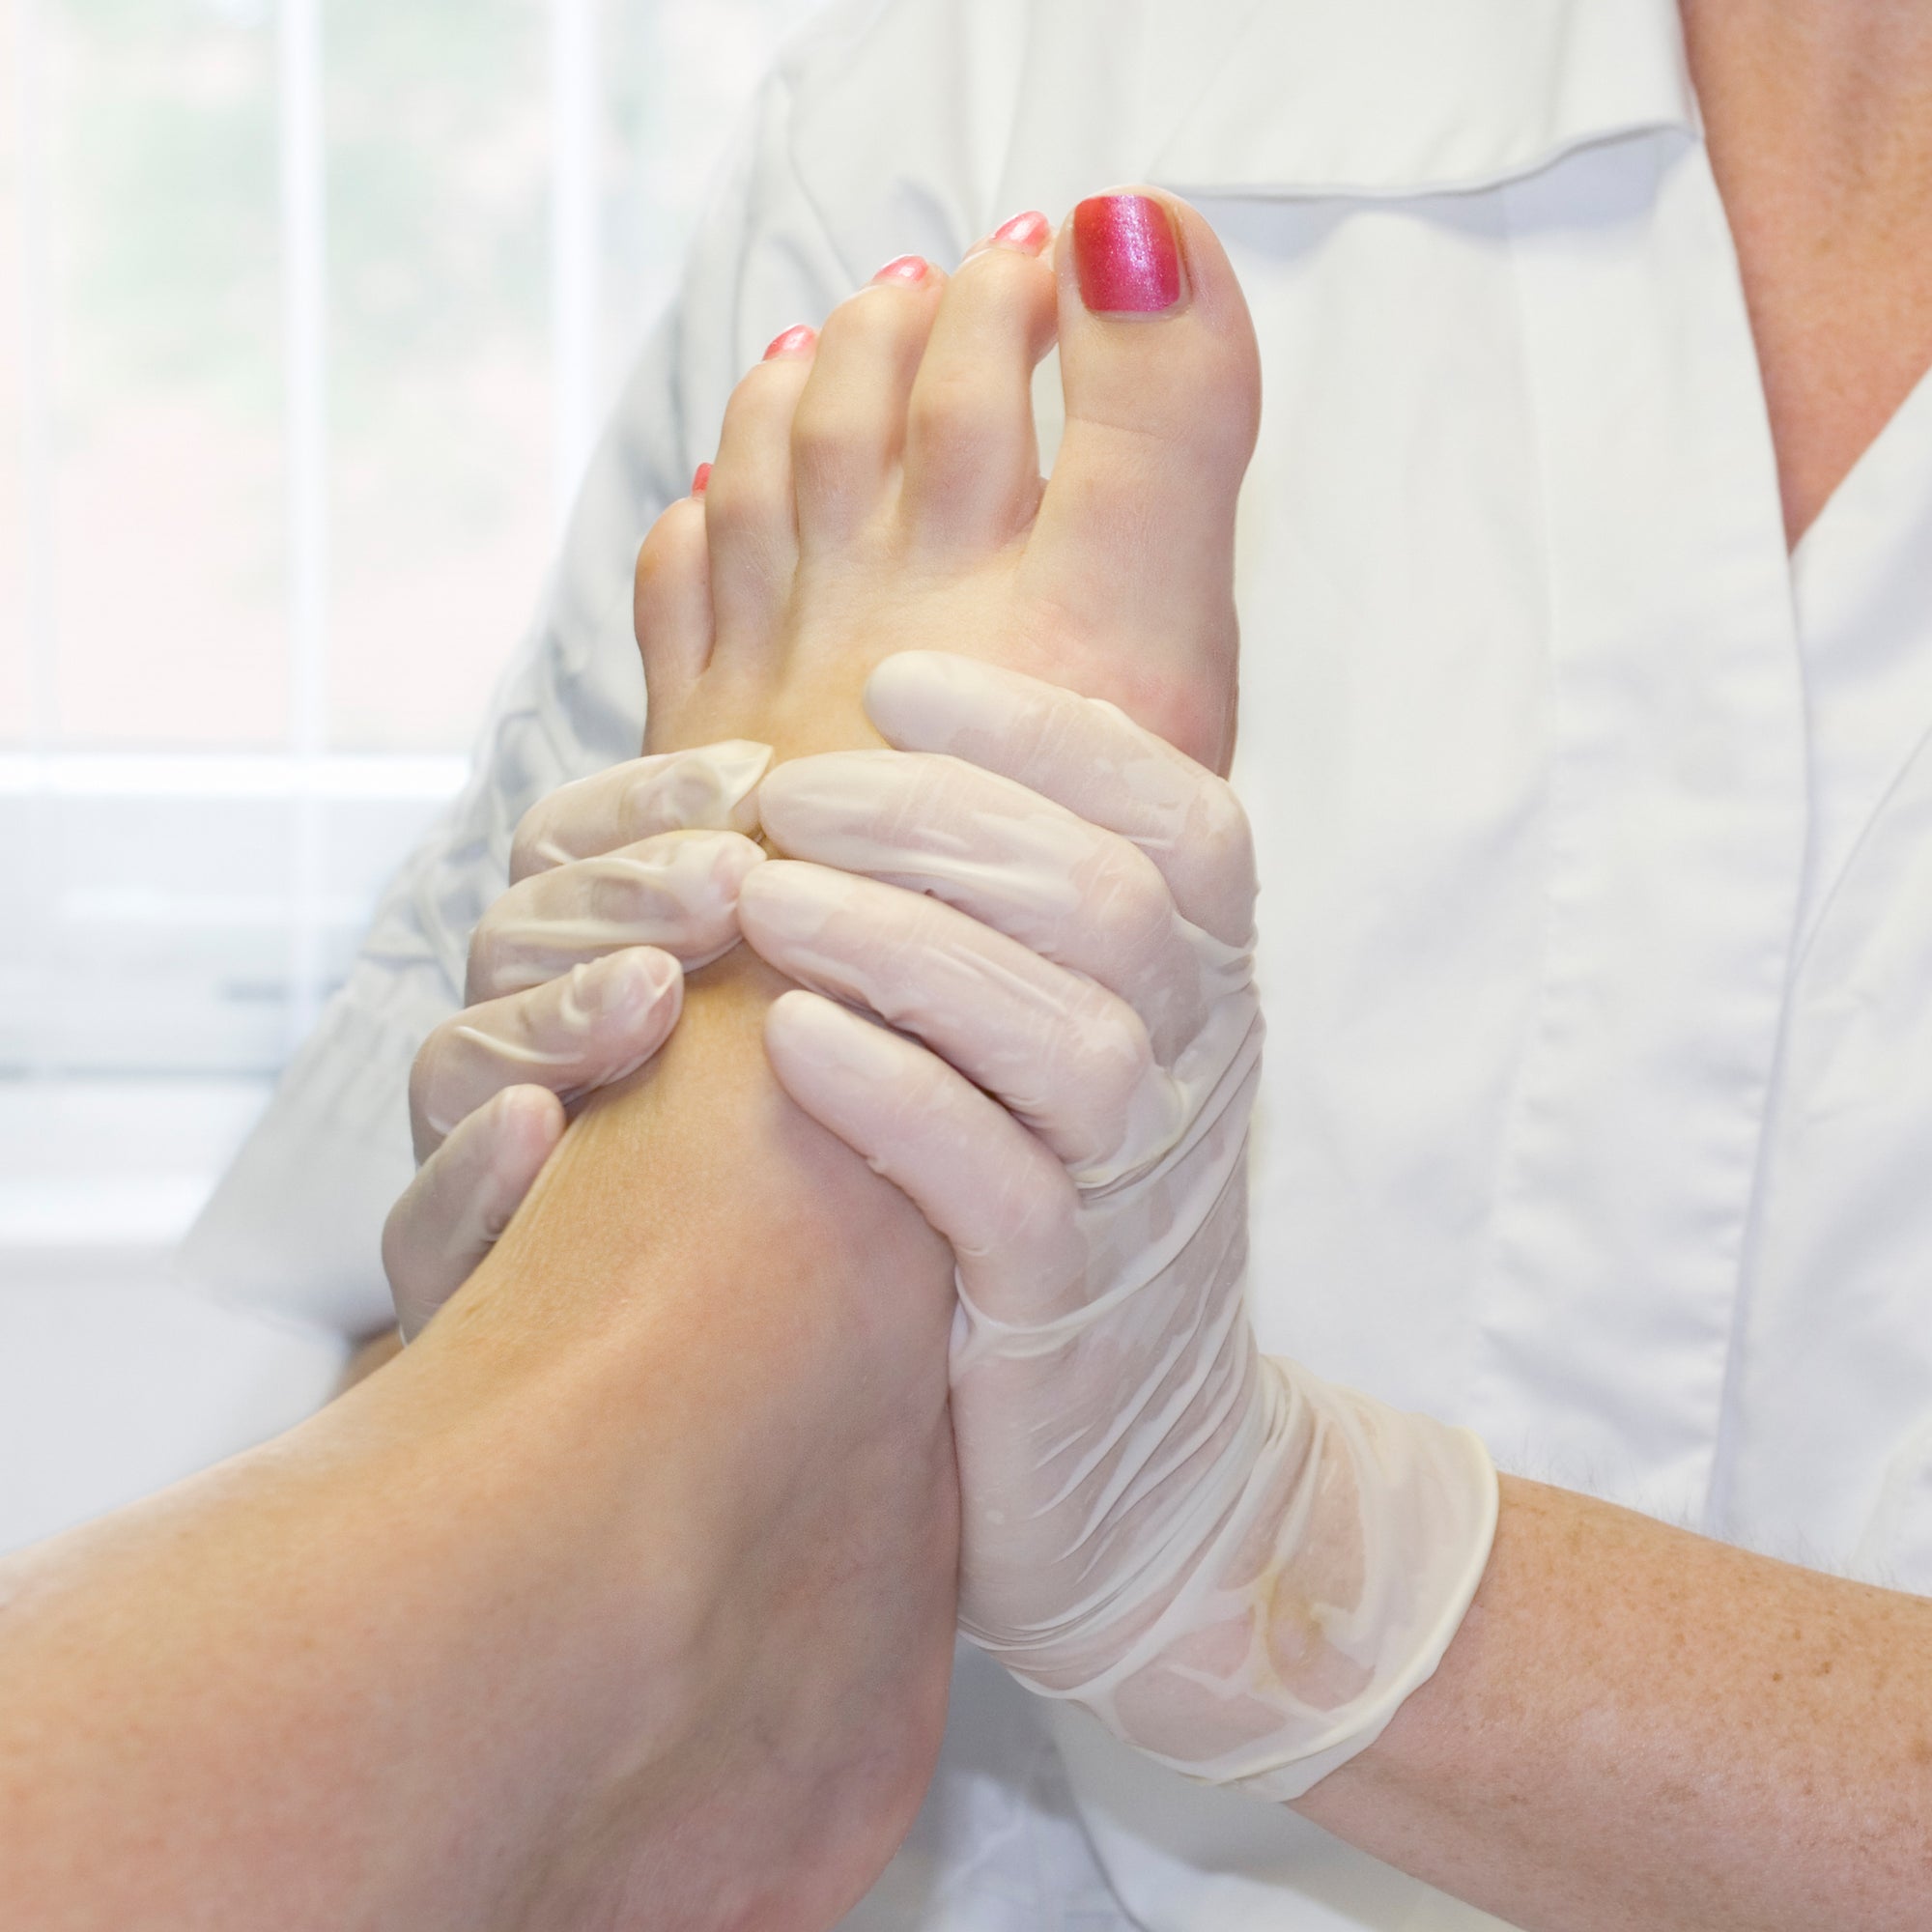 7 Essential Tips for a Safer Pedicure for Diabetic Feet